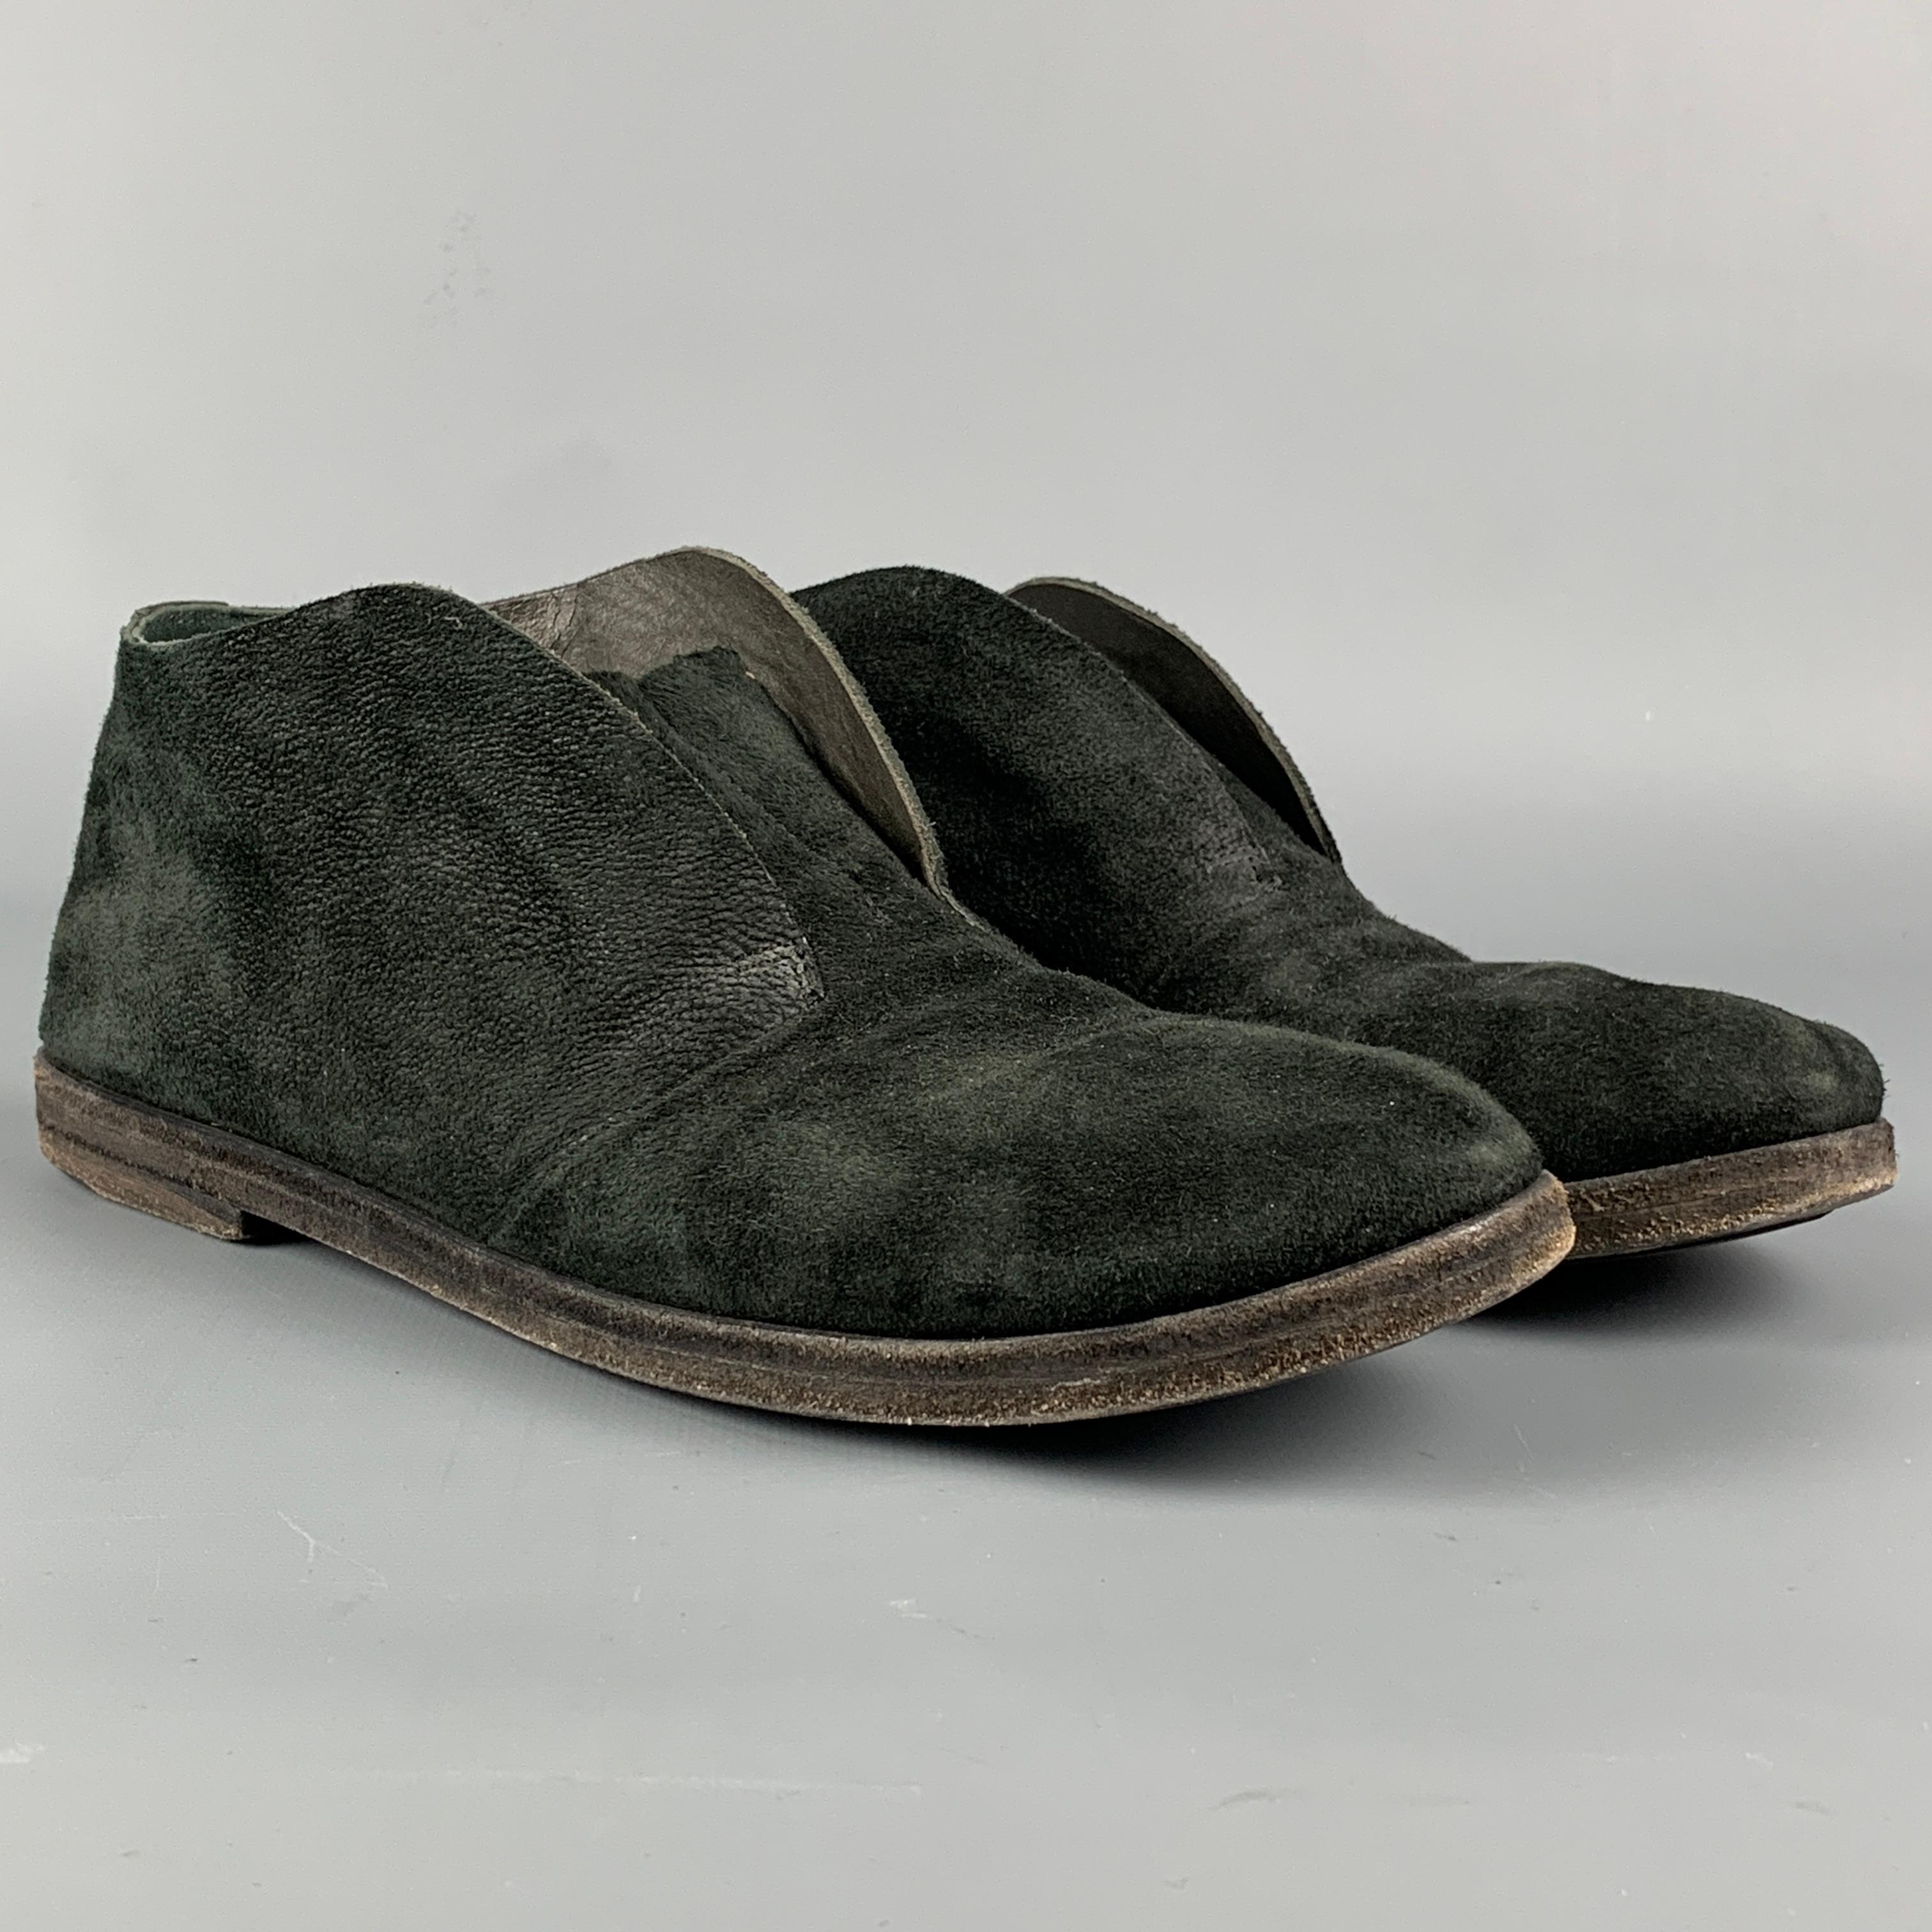 MARSELL flats comes in a black distressed suede featuring a slip on style and a round toe. Made in Italy.

Good Pre-Owned Condition.
Marked: 37

Outsole: 10.5 in. x 3.5 in. 

 